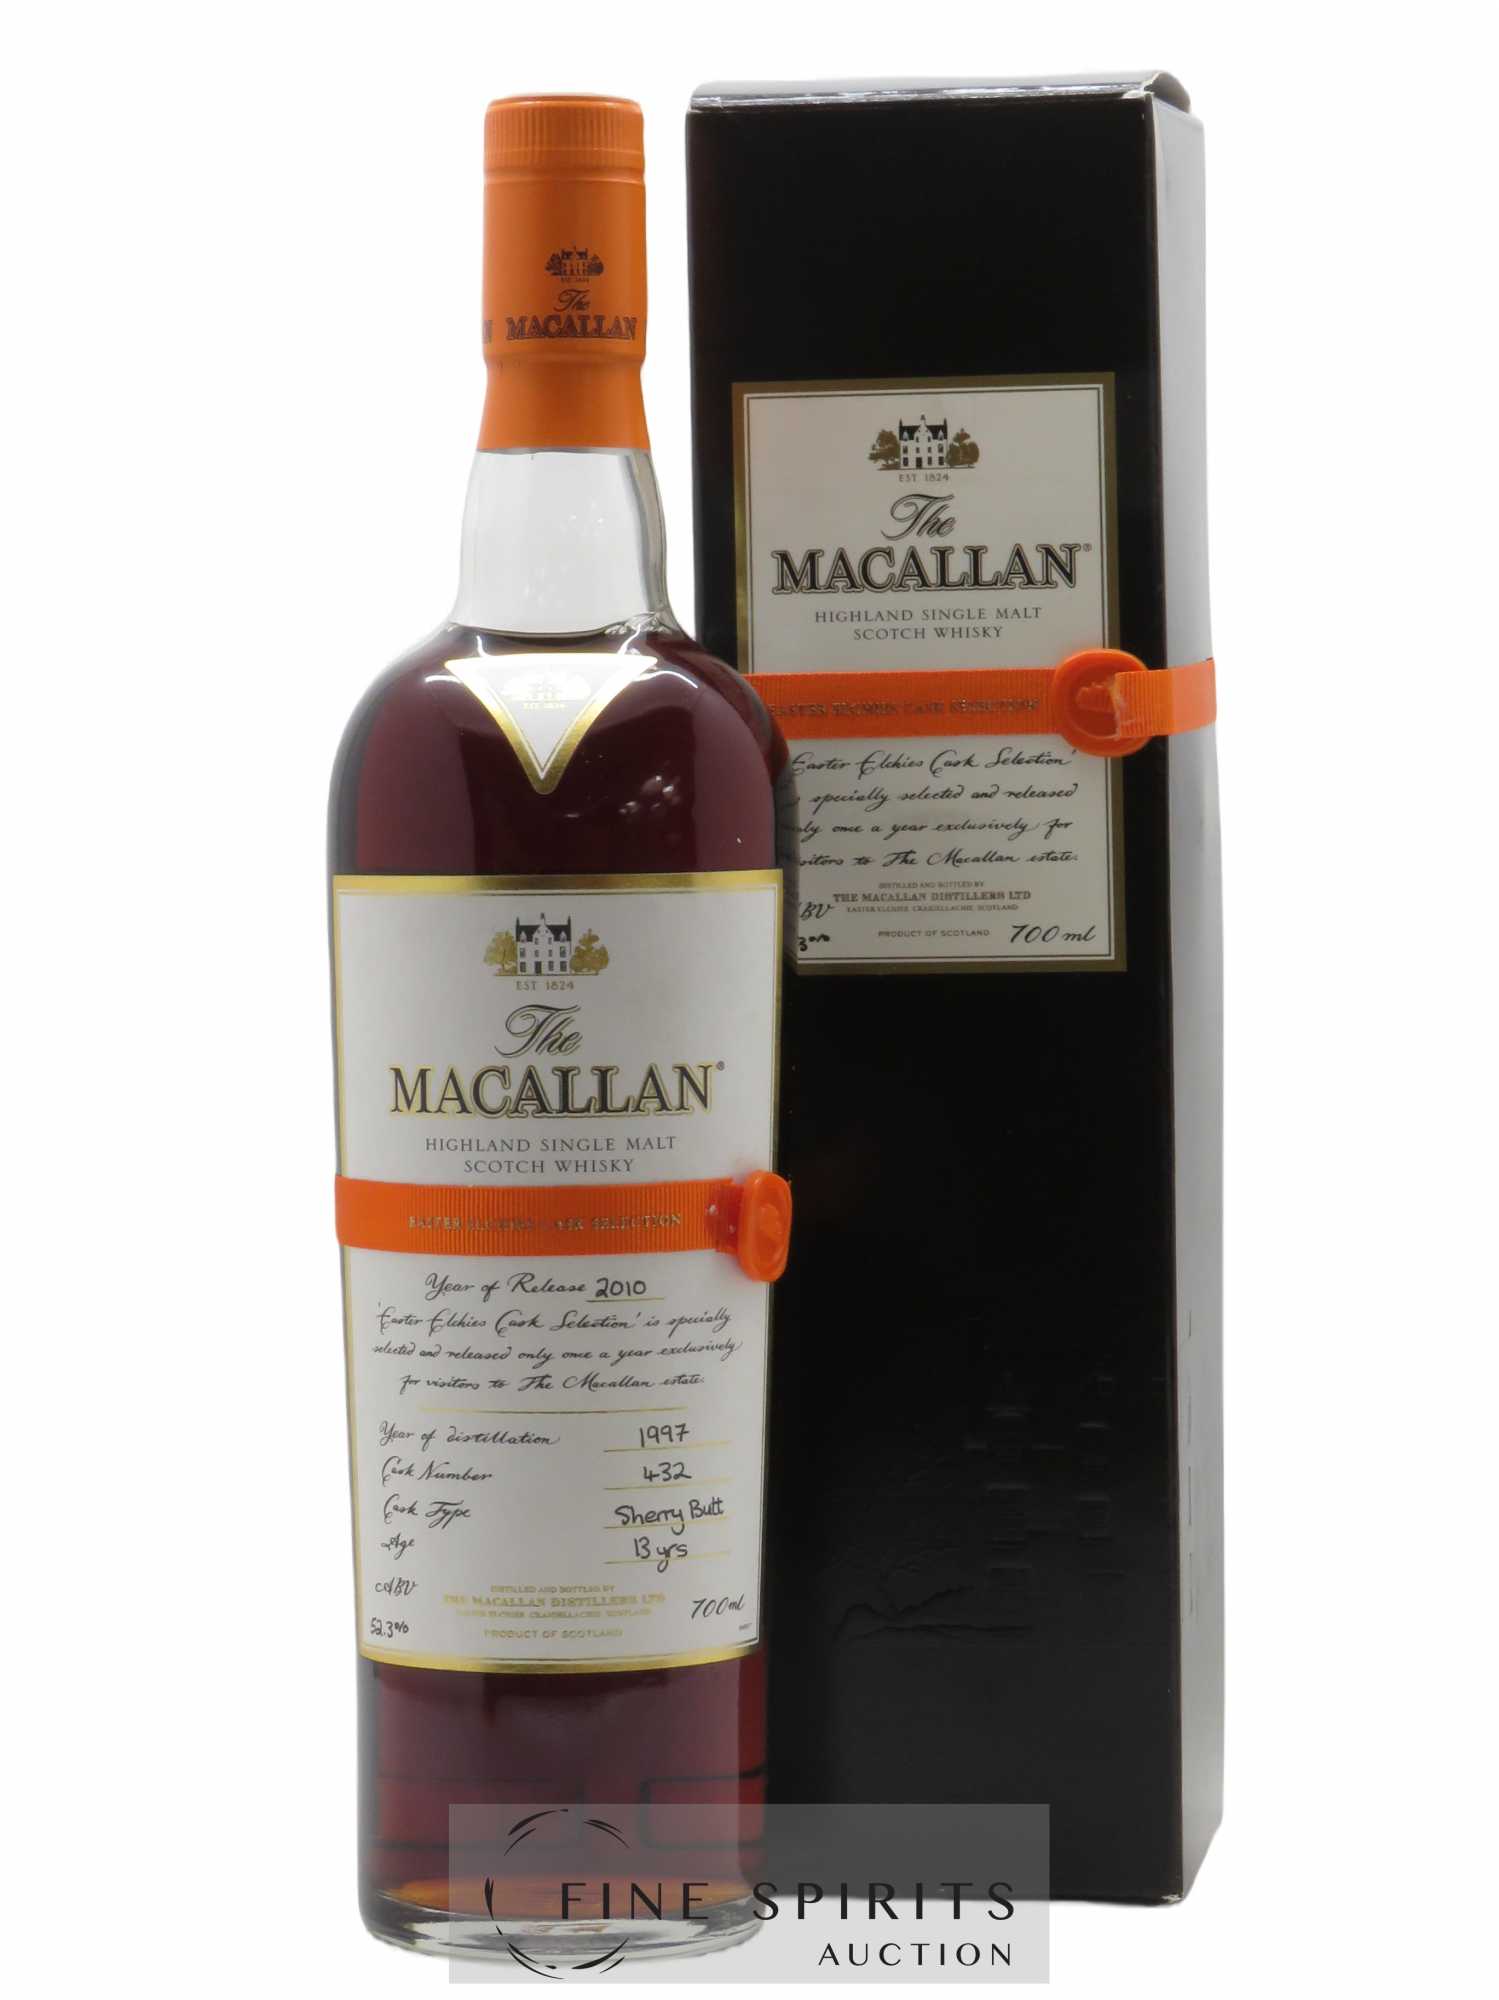 Macallan (The) 13 years 1997 Of. Sherry Butt Easter Elchies Cask